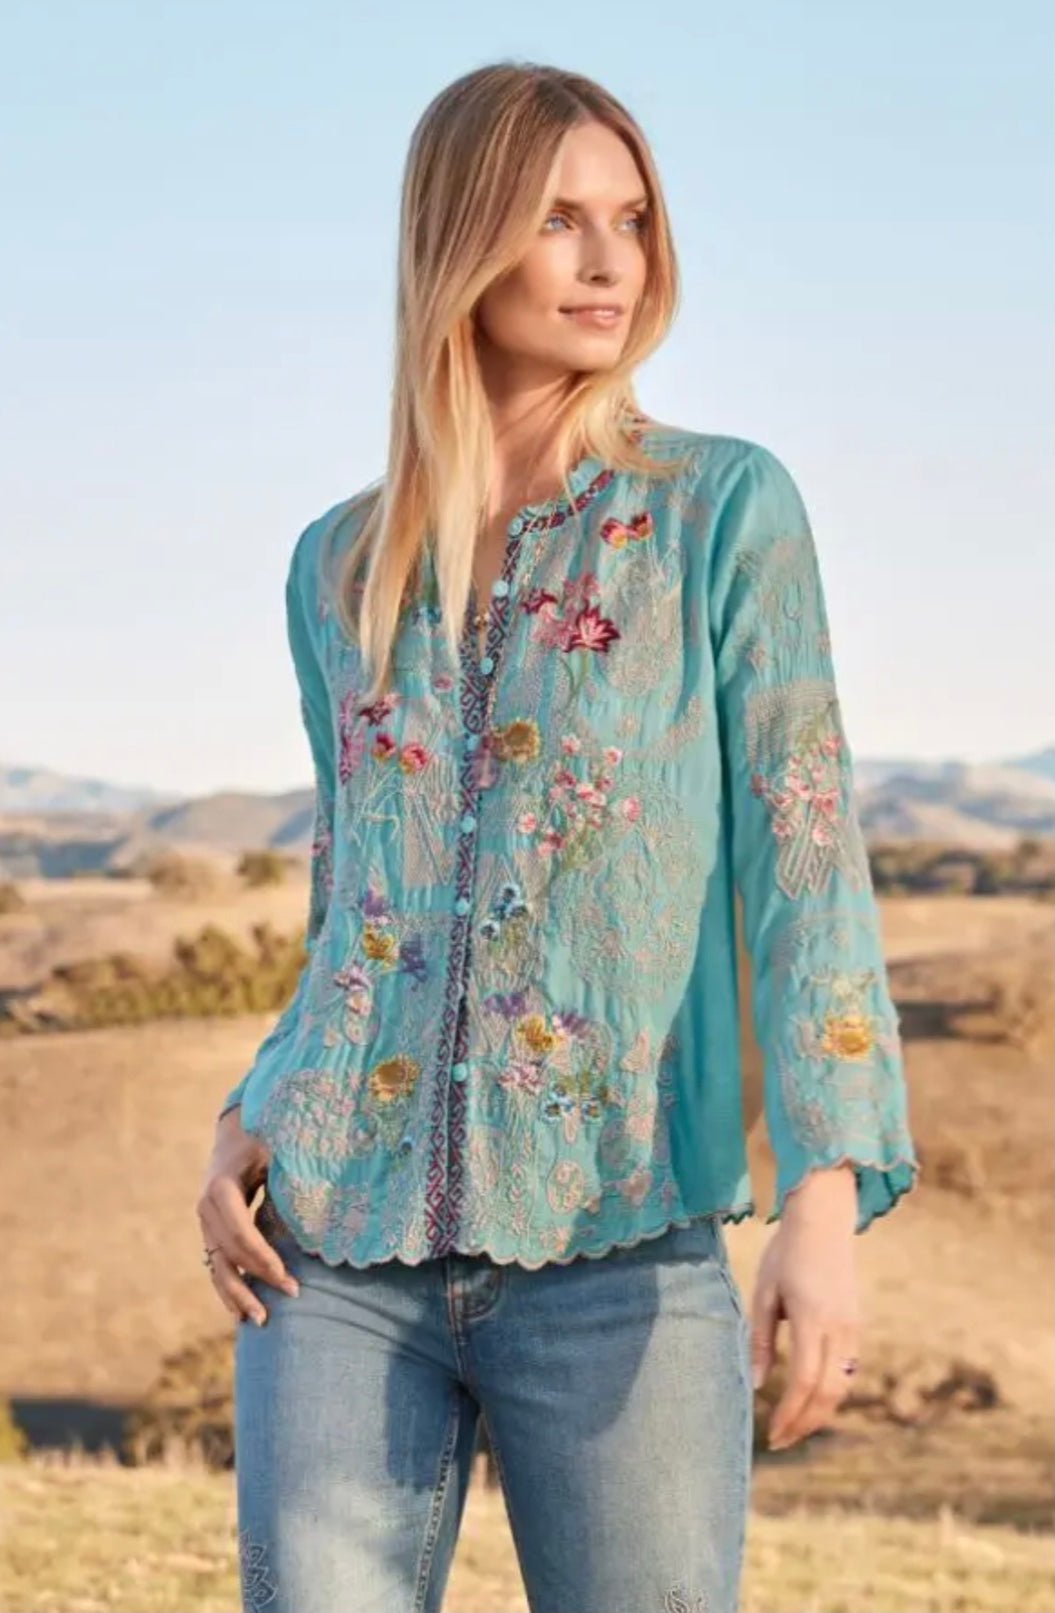 Allbee Blouse in Peacock Blue by Johnny Was